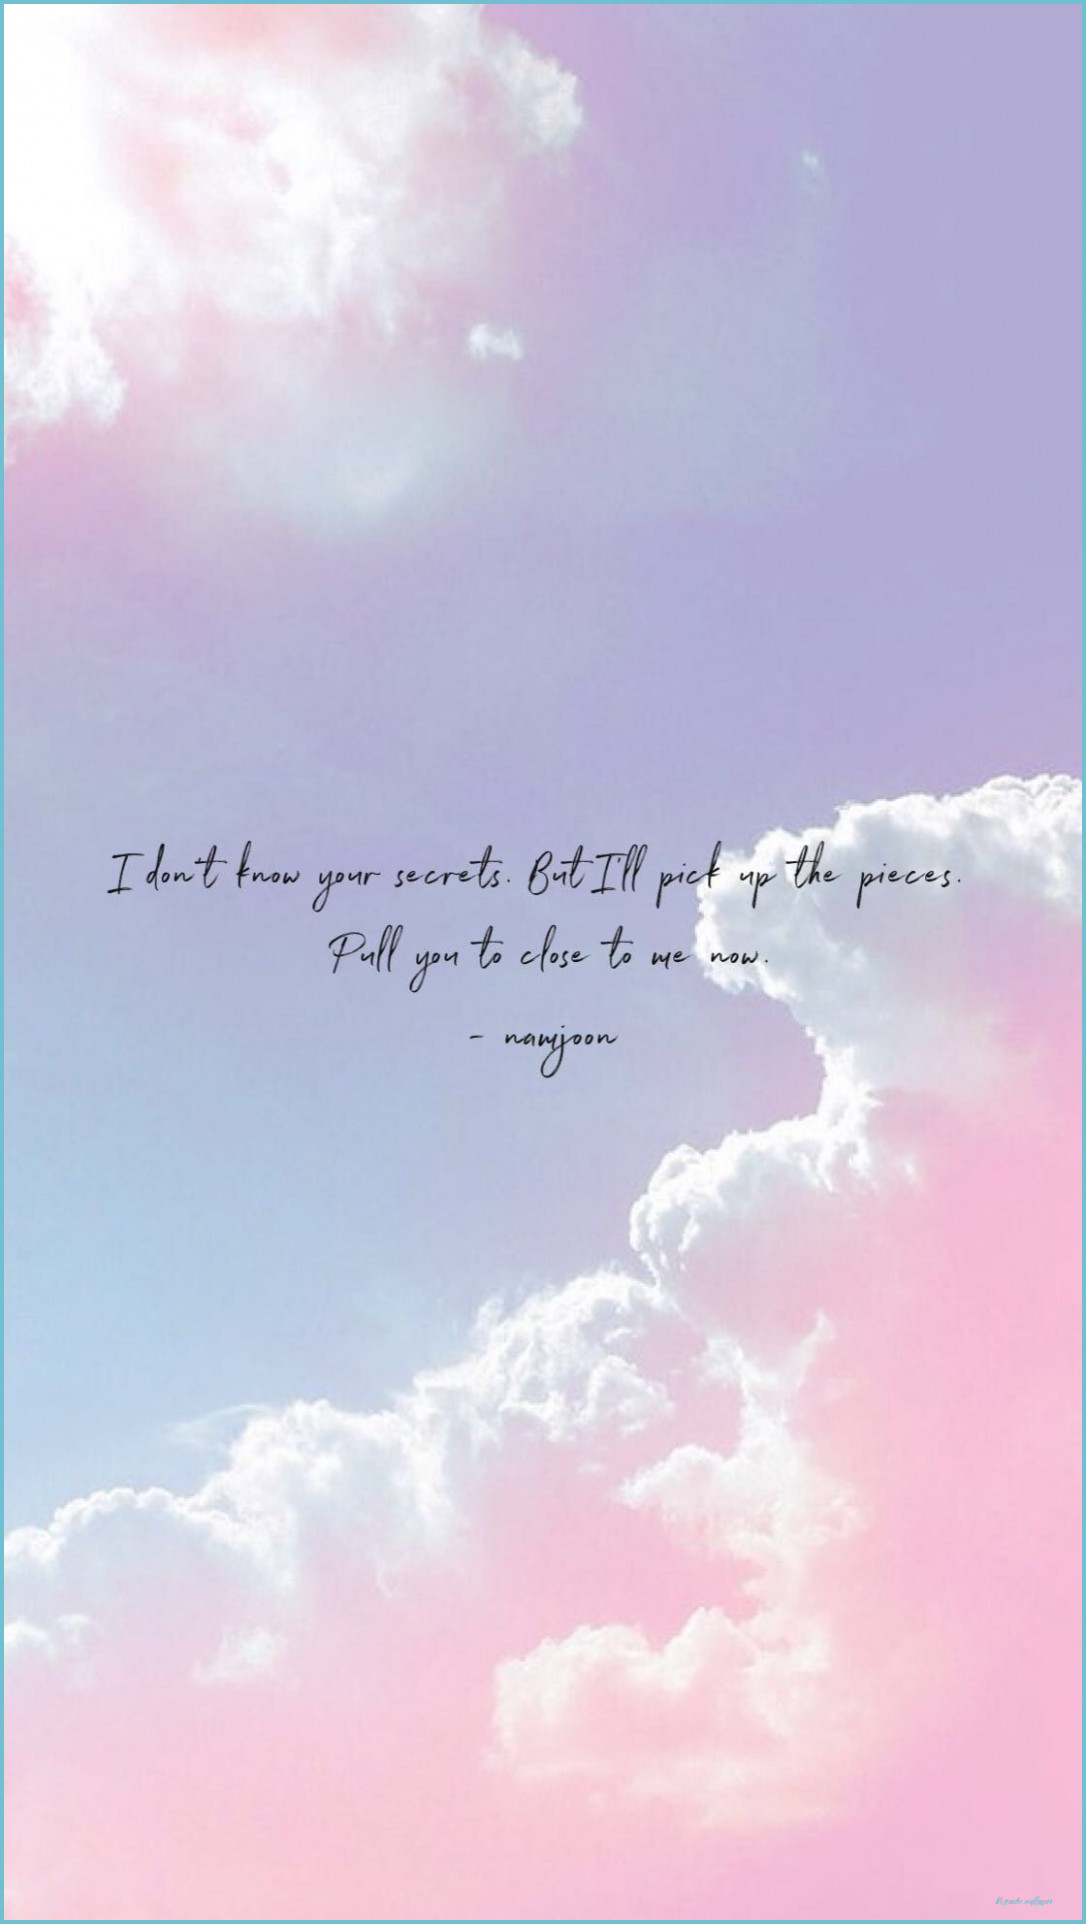 I PURPLE U-BTS Quote Wallpaper for Android - Download